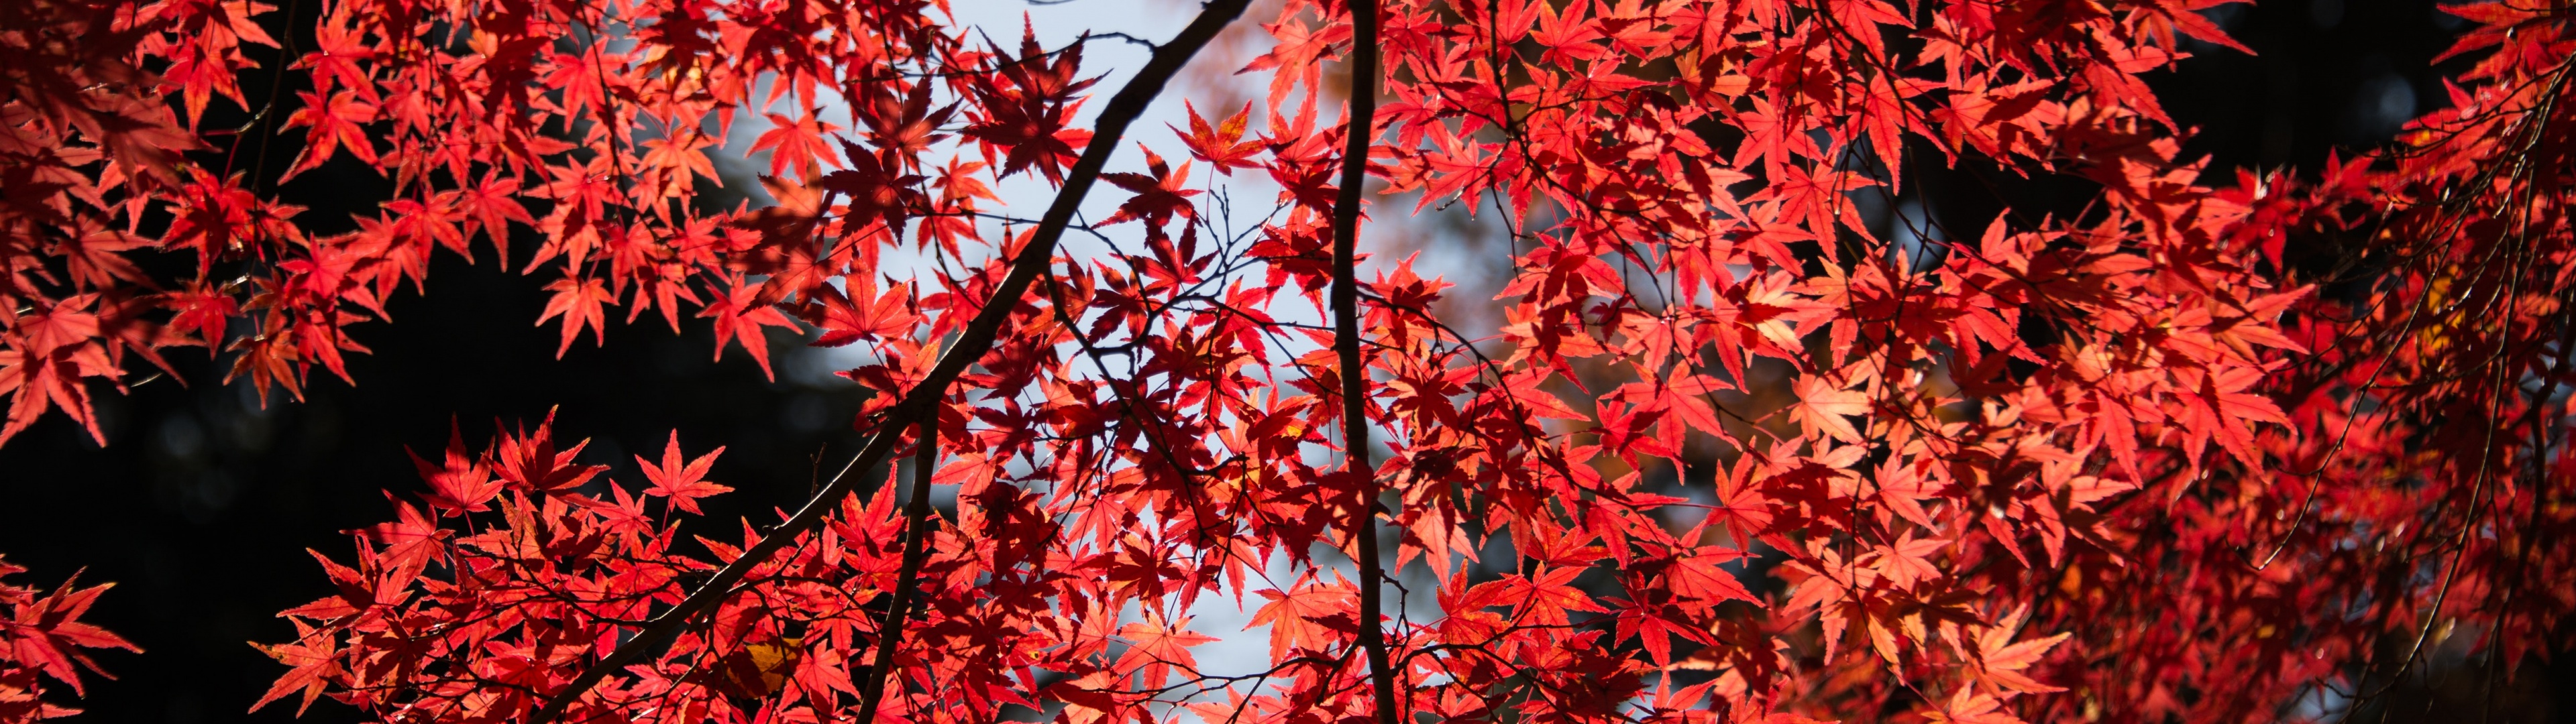 Maple tree Wallpaper 4K, Red leaves, Autumn, Tree Branches